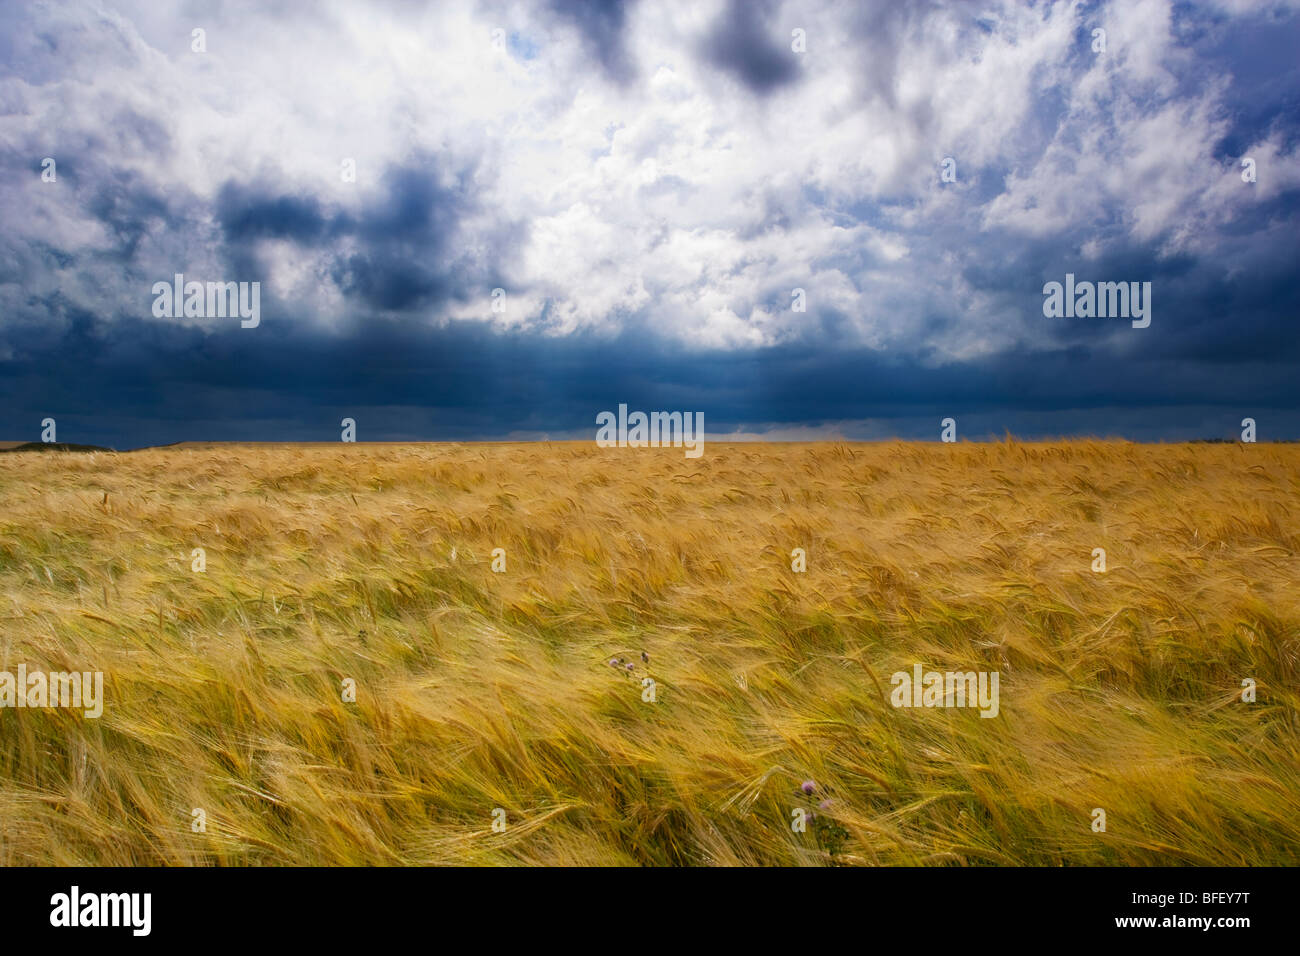 Thunder storm moving over grain field, Ridge Road 221, Alberta, Canada, cloud, weather, agriculture Stock Photo